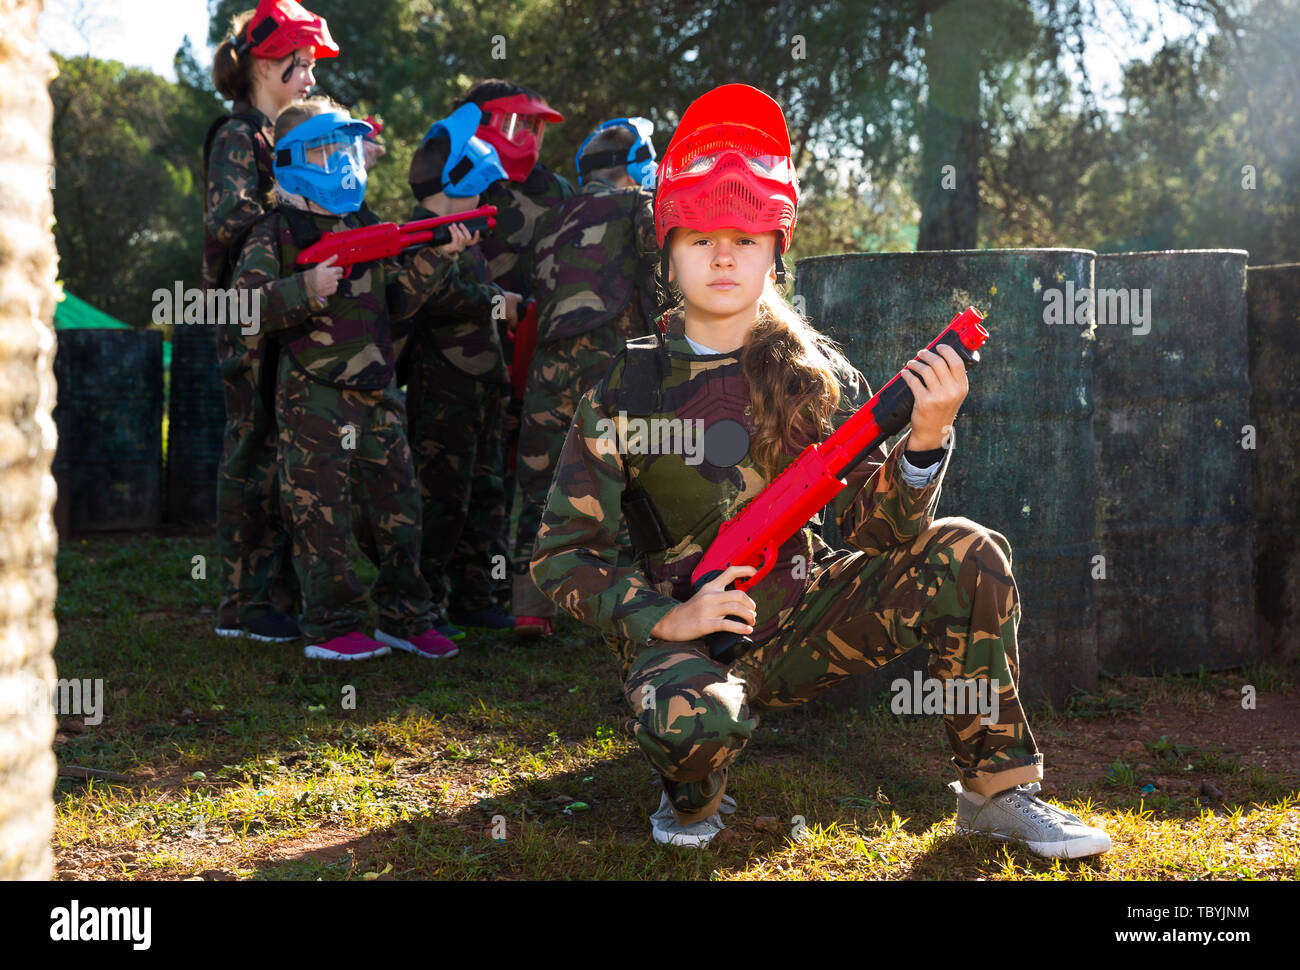 sportive girl paintball player in camouflage standing with gun before playing outdoors Stock Photo